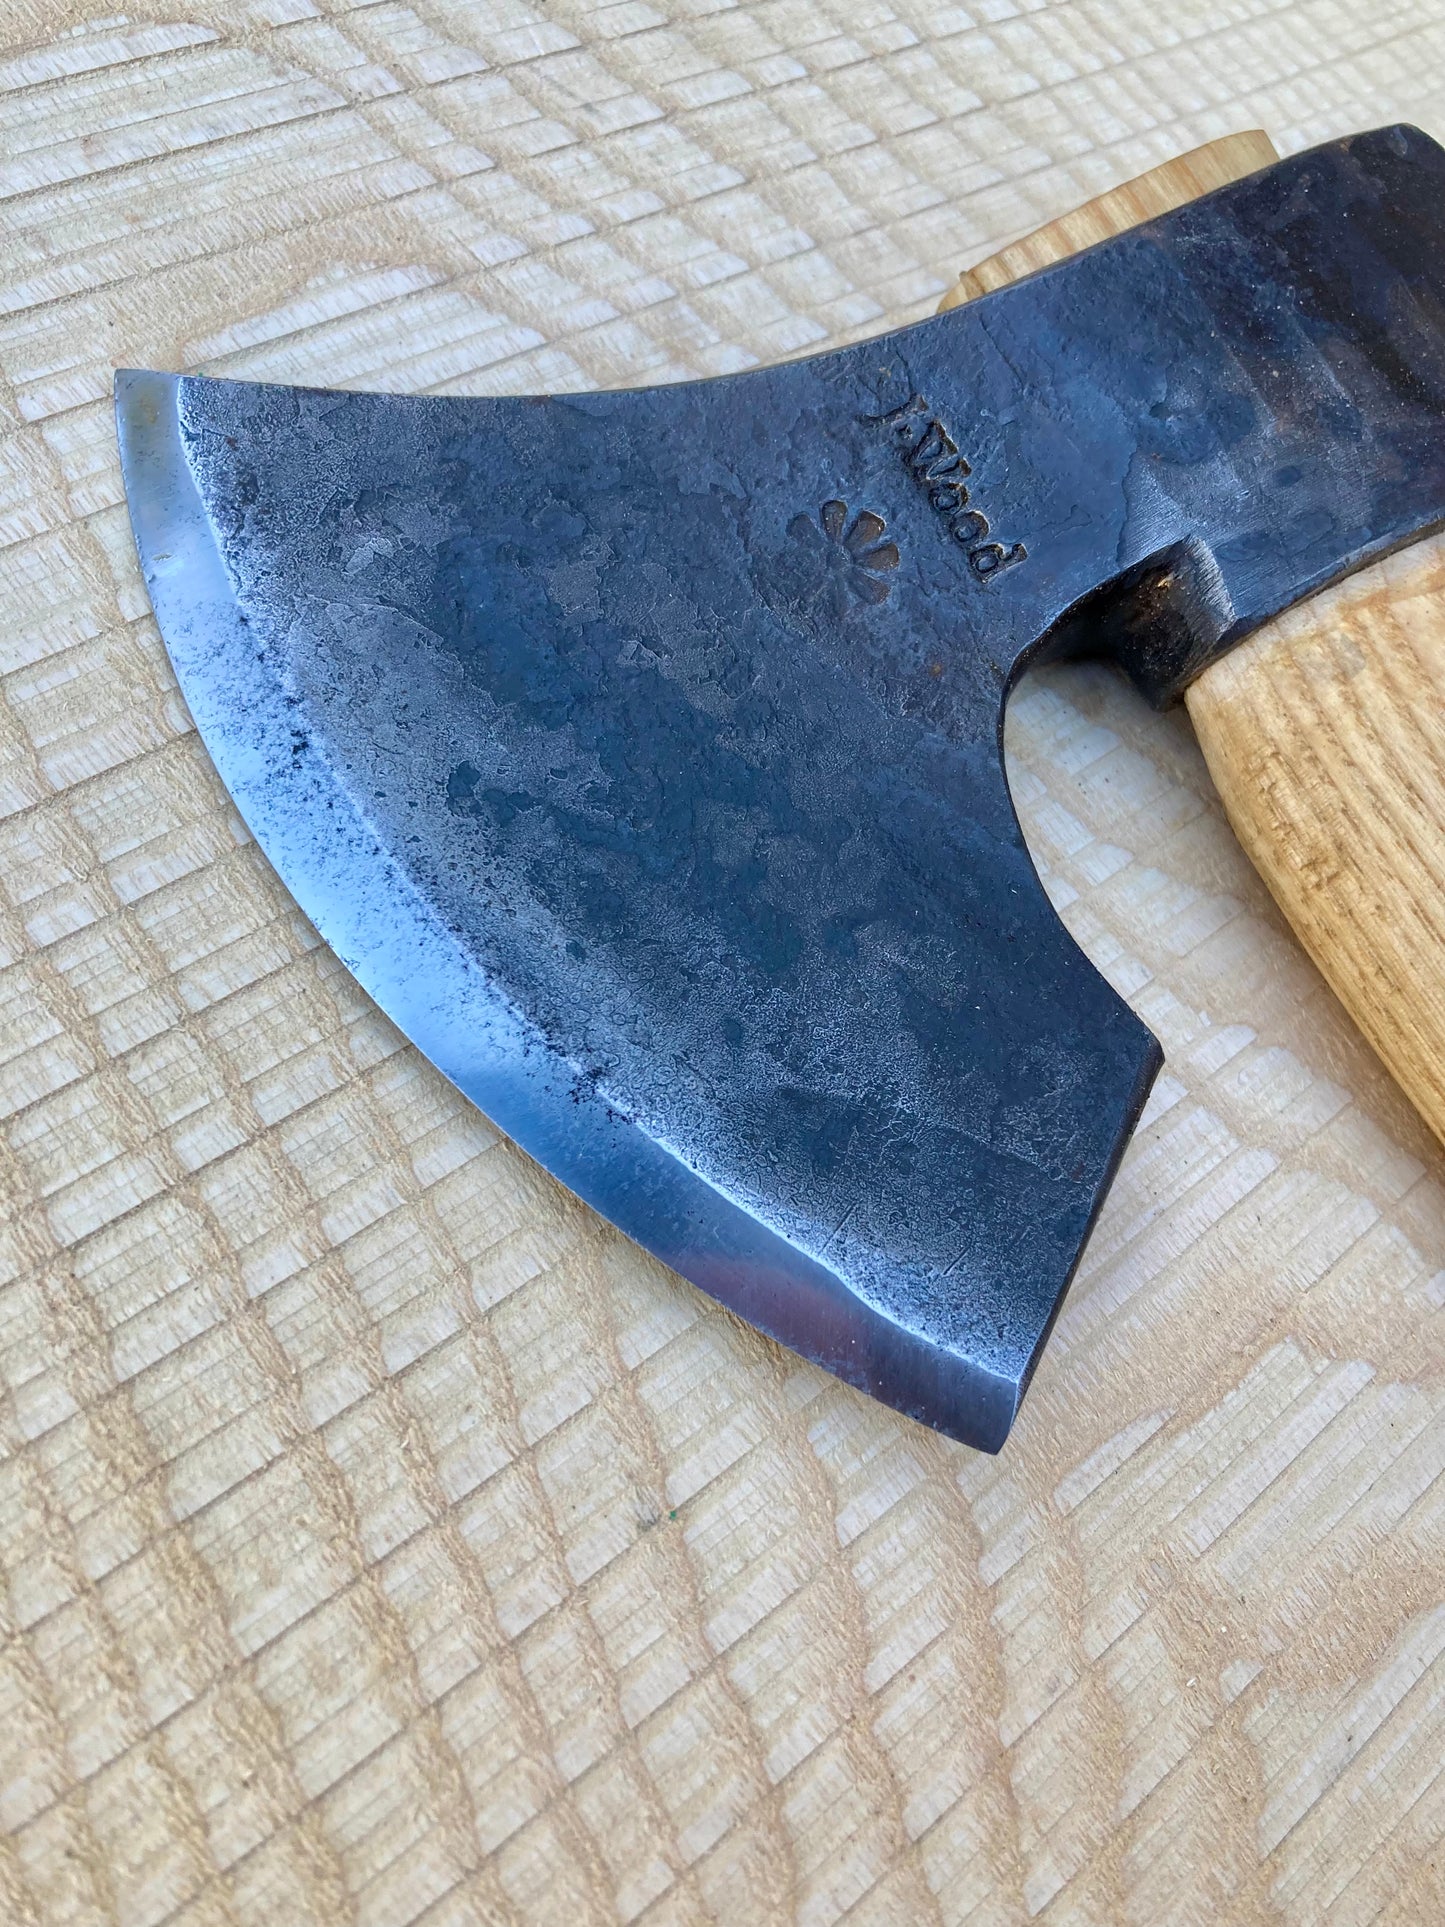 James Wood - Socketed Carving Axe